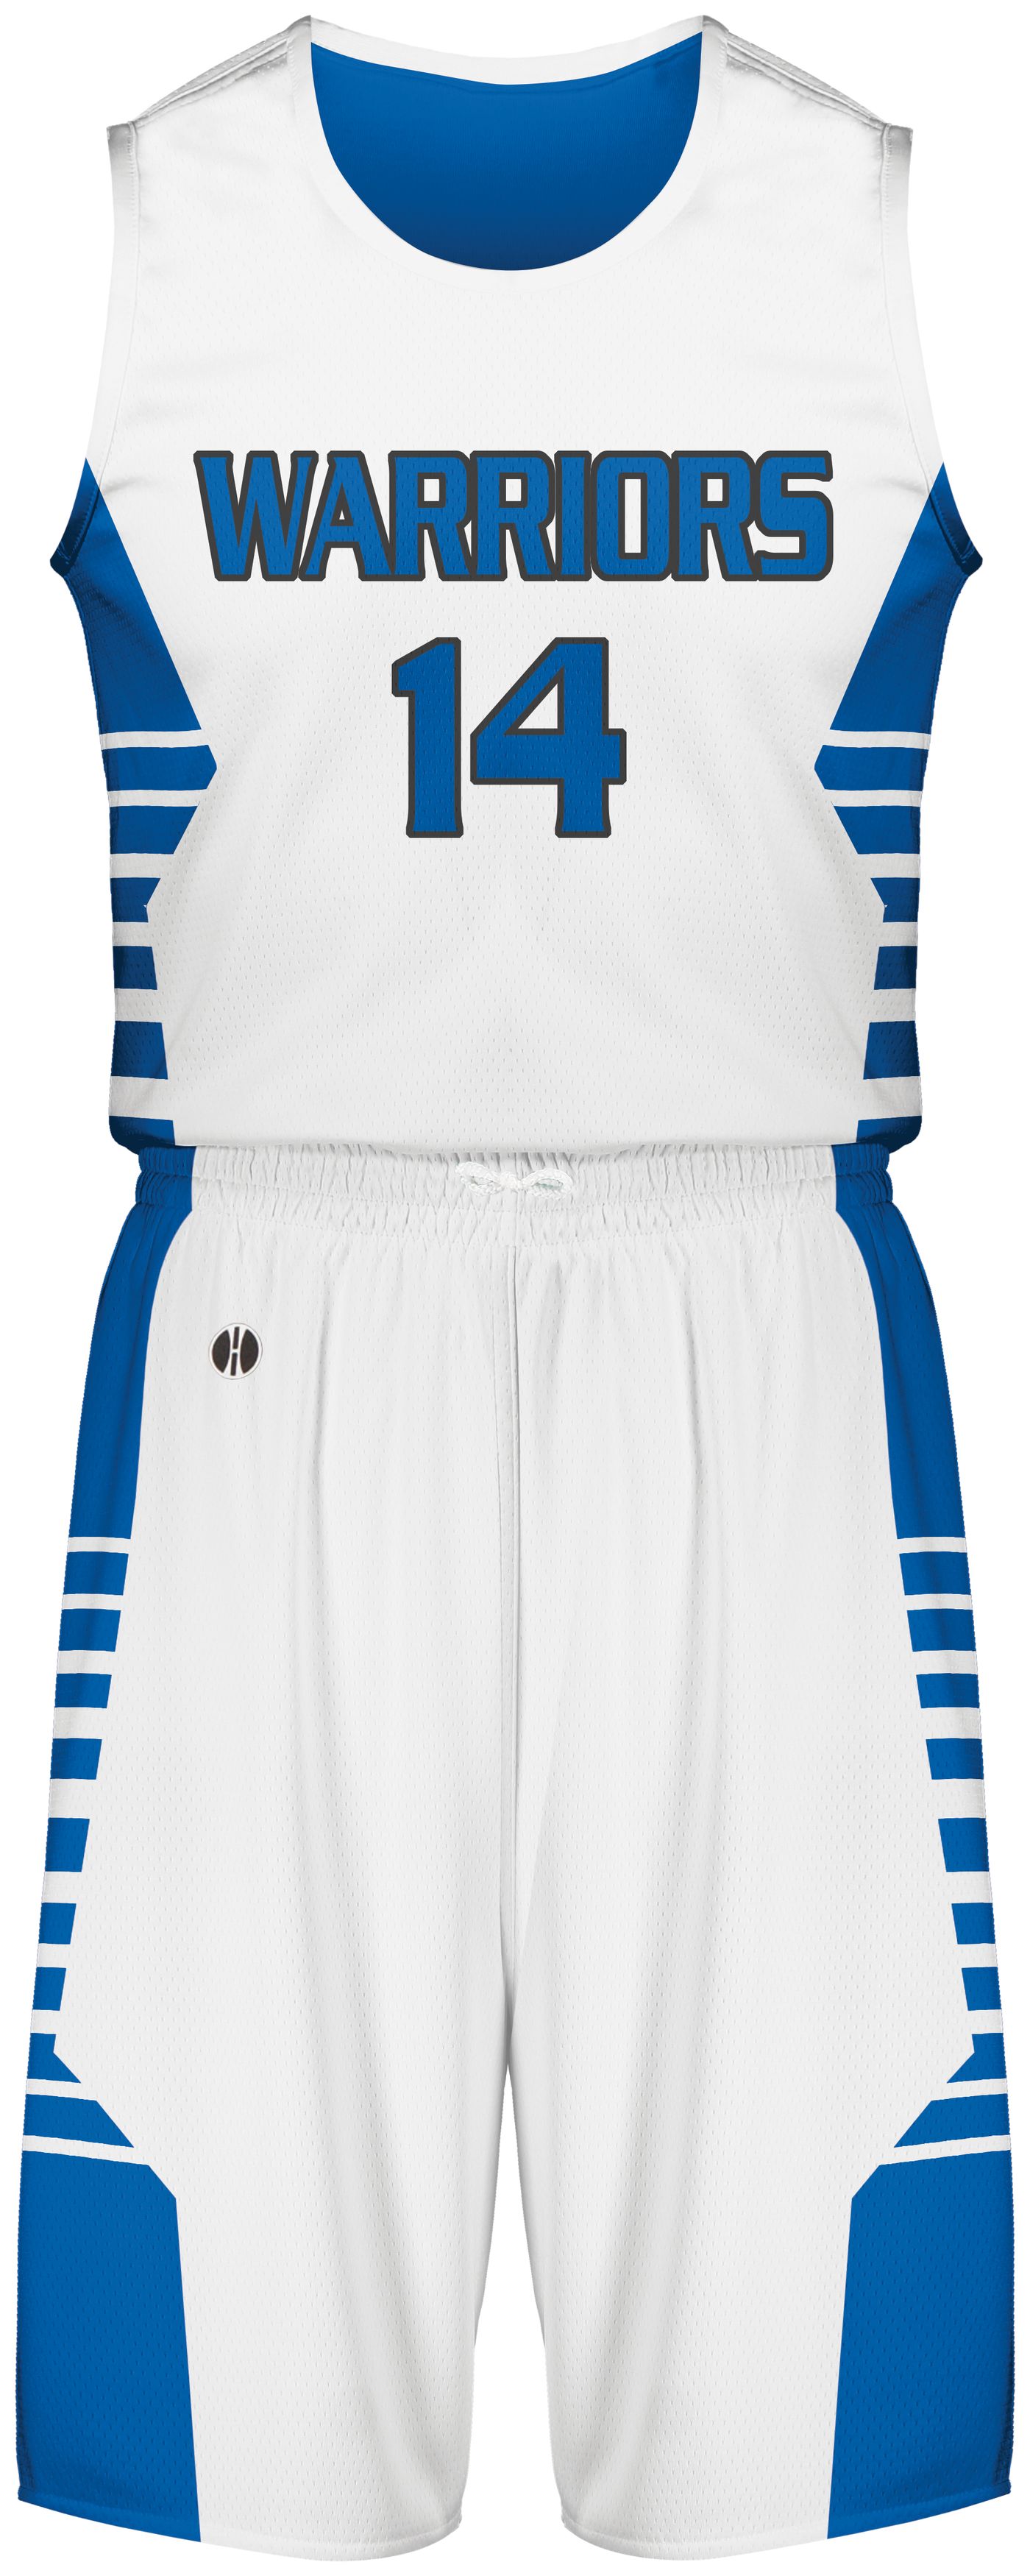 Holloway CUT_228316  LADIES FREESTYLE SUBLIMATED TURBO BASKETBALL JERSEY